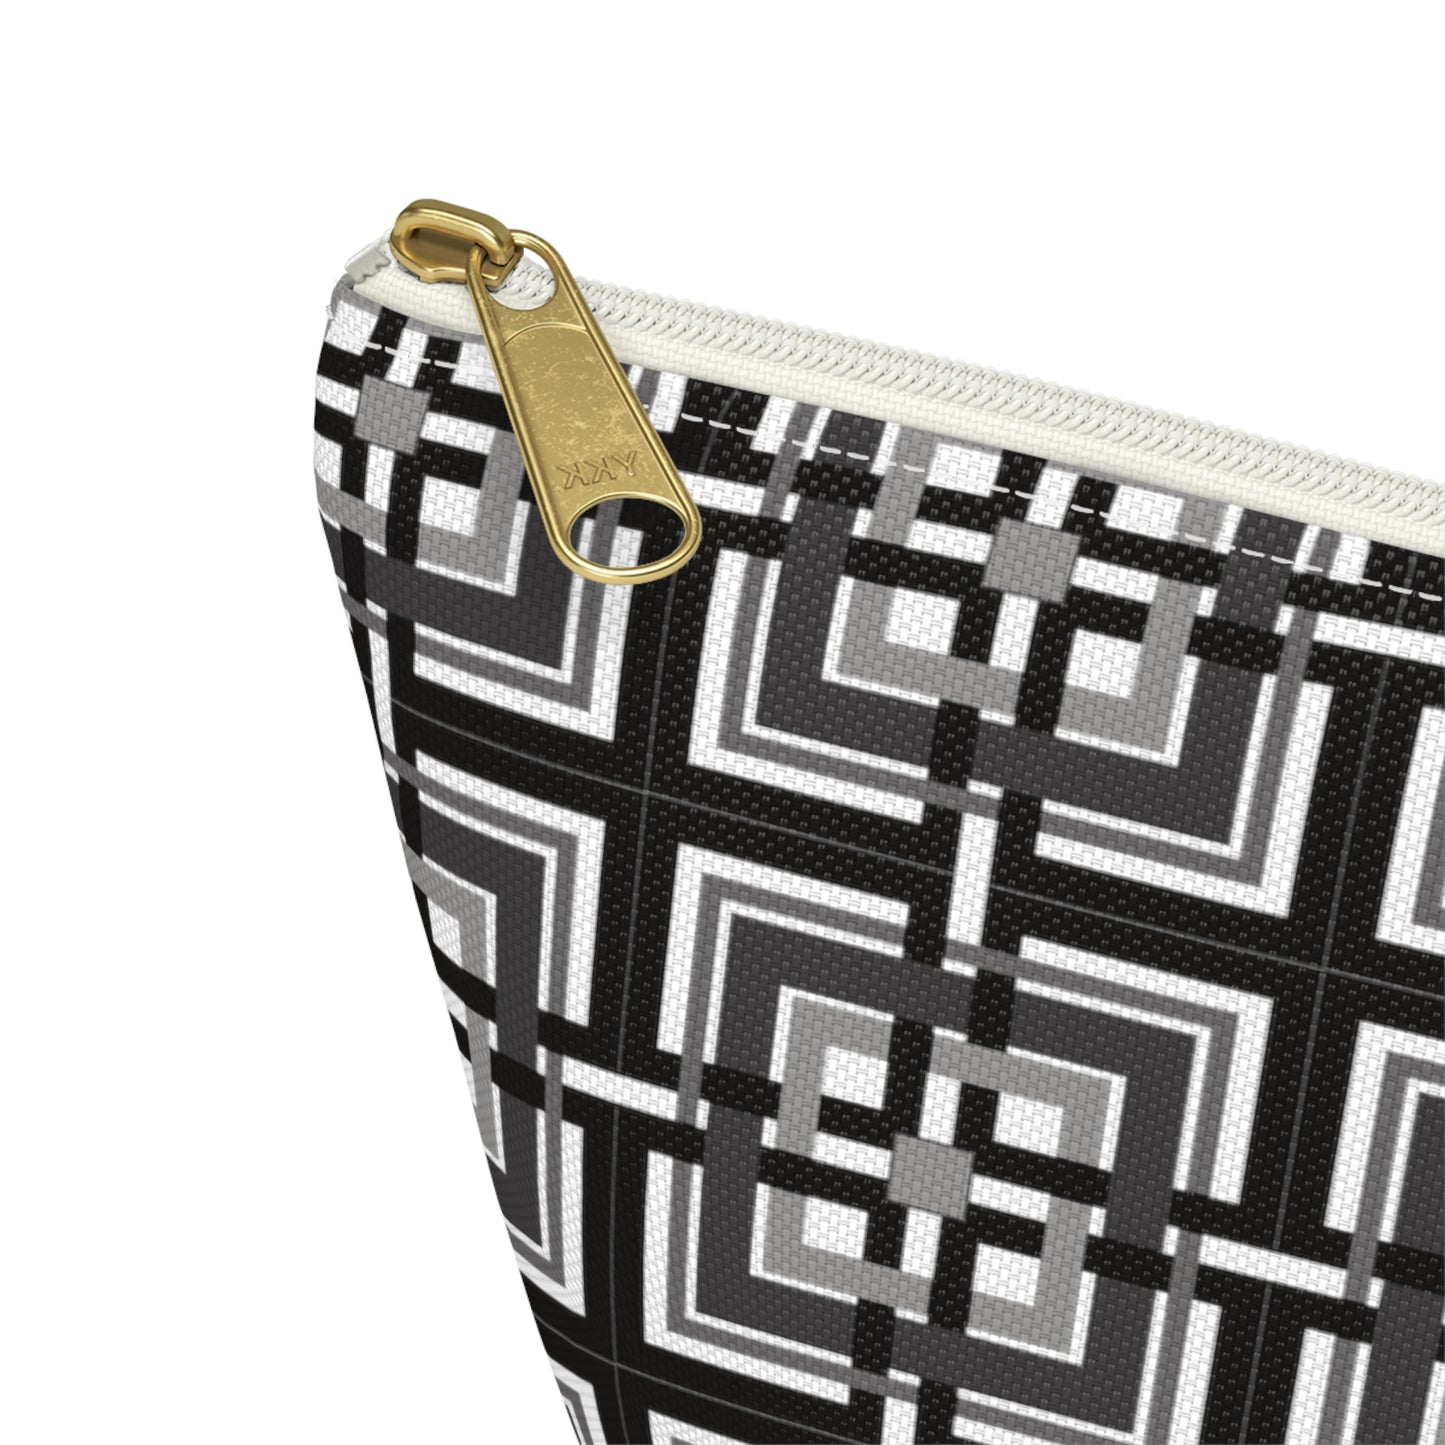 Intersecting Squares - Black - White - Accessory Pouch w T-bottom